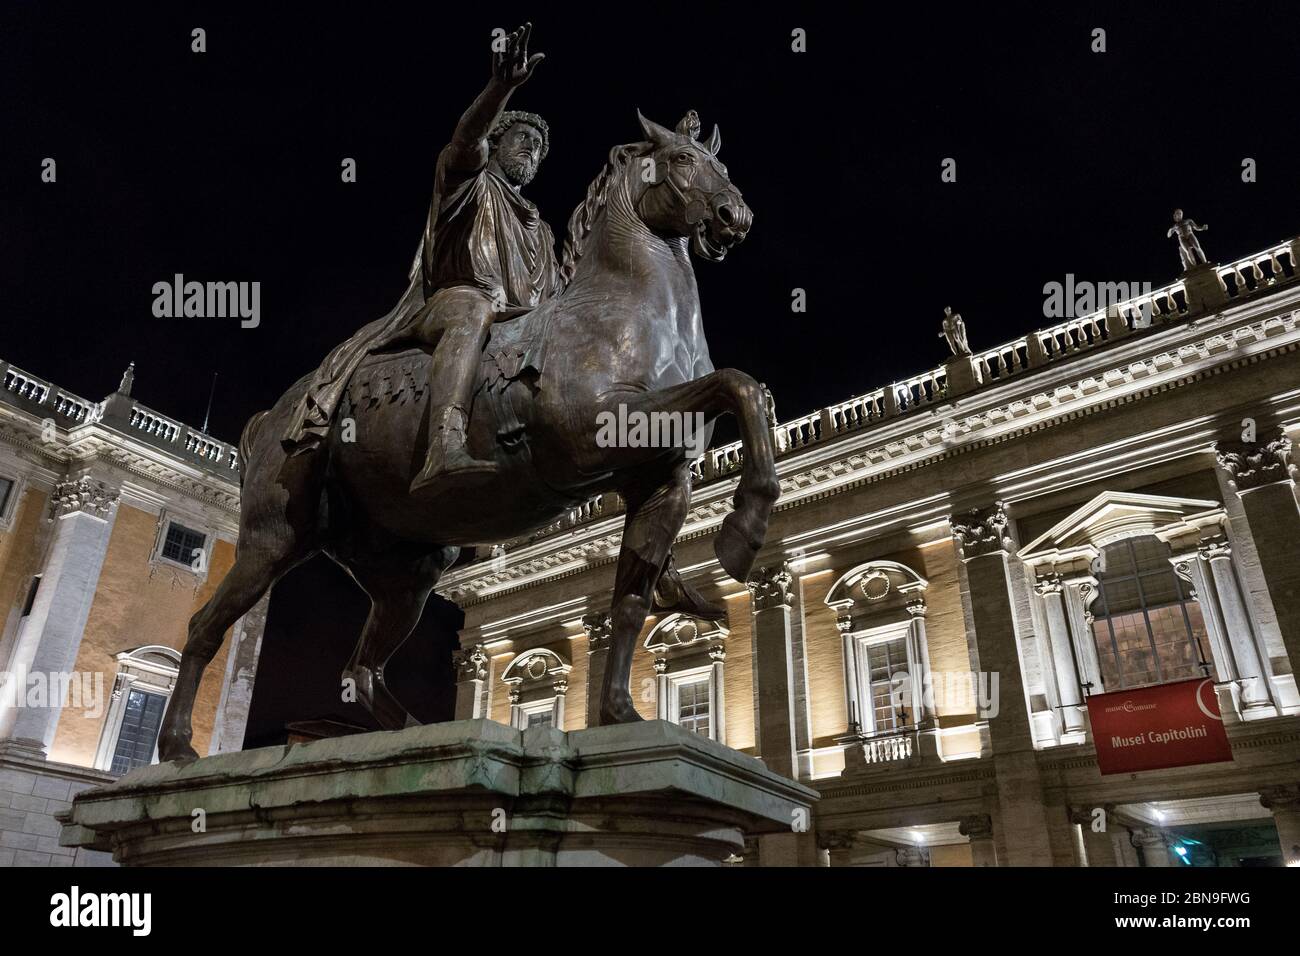 Rome, Italy: Capitol square of Rome by night with the statue of Marcus Aurelius on the left and Capitoline museum on the right. Stock Photo